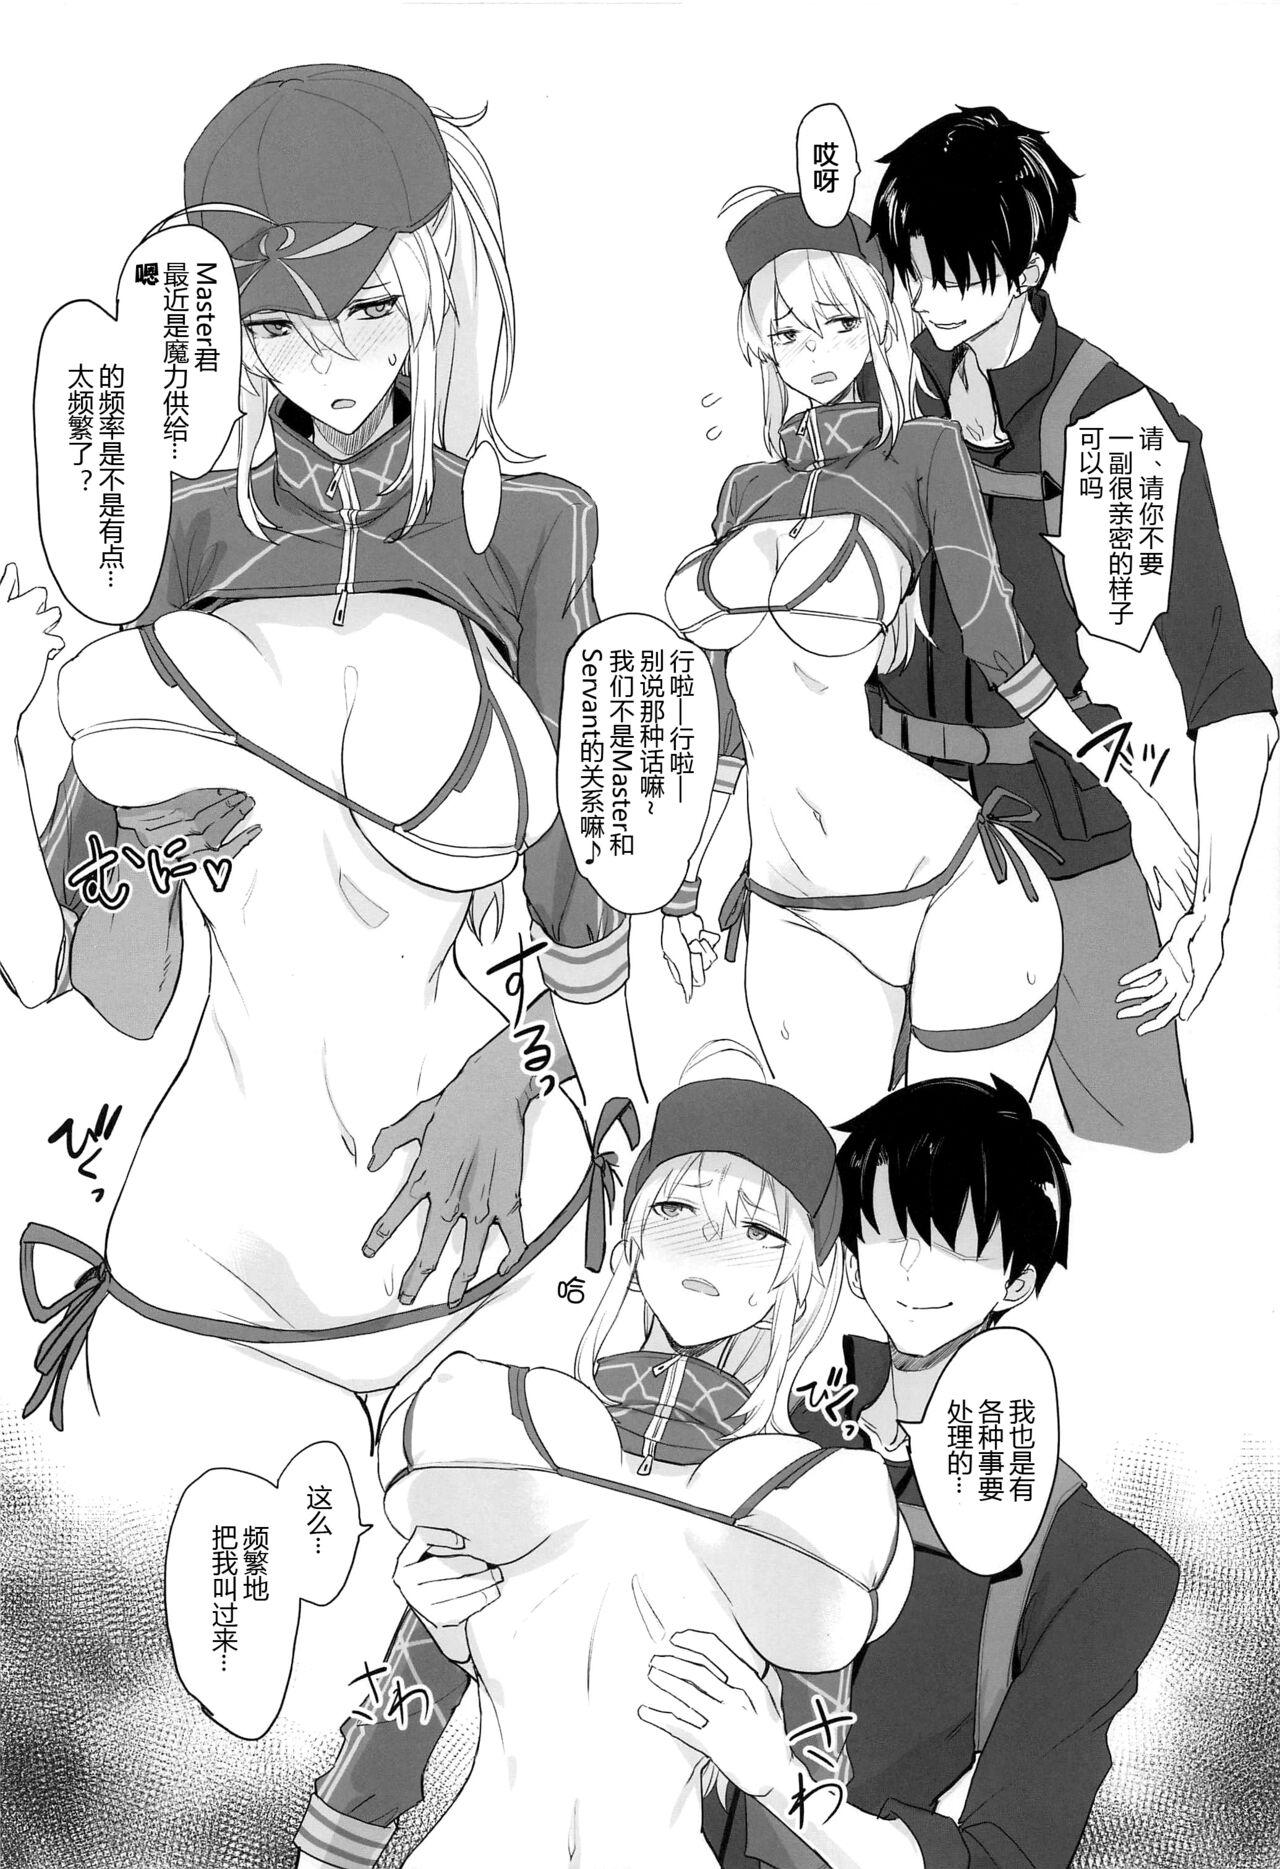 Fit FGOnoerohonα - Fate grand order Salope - Page 4